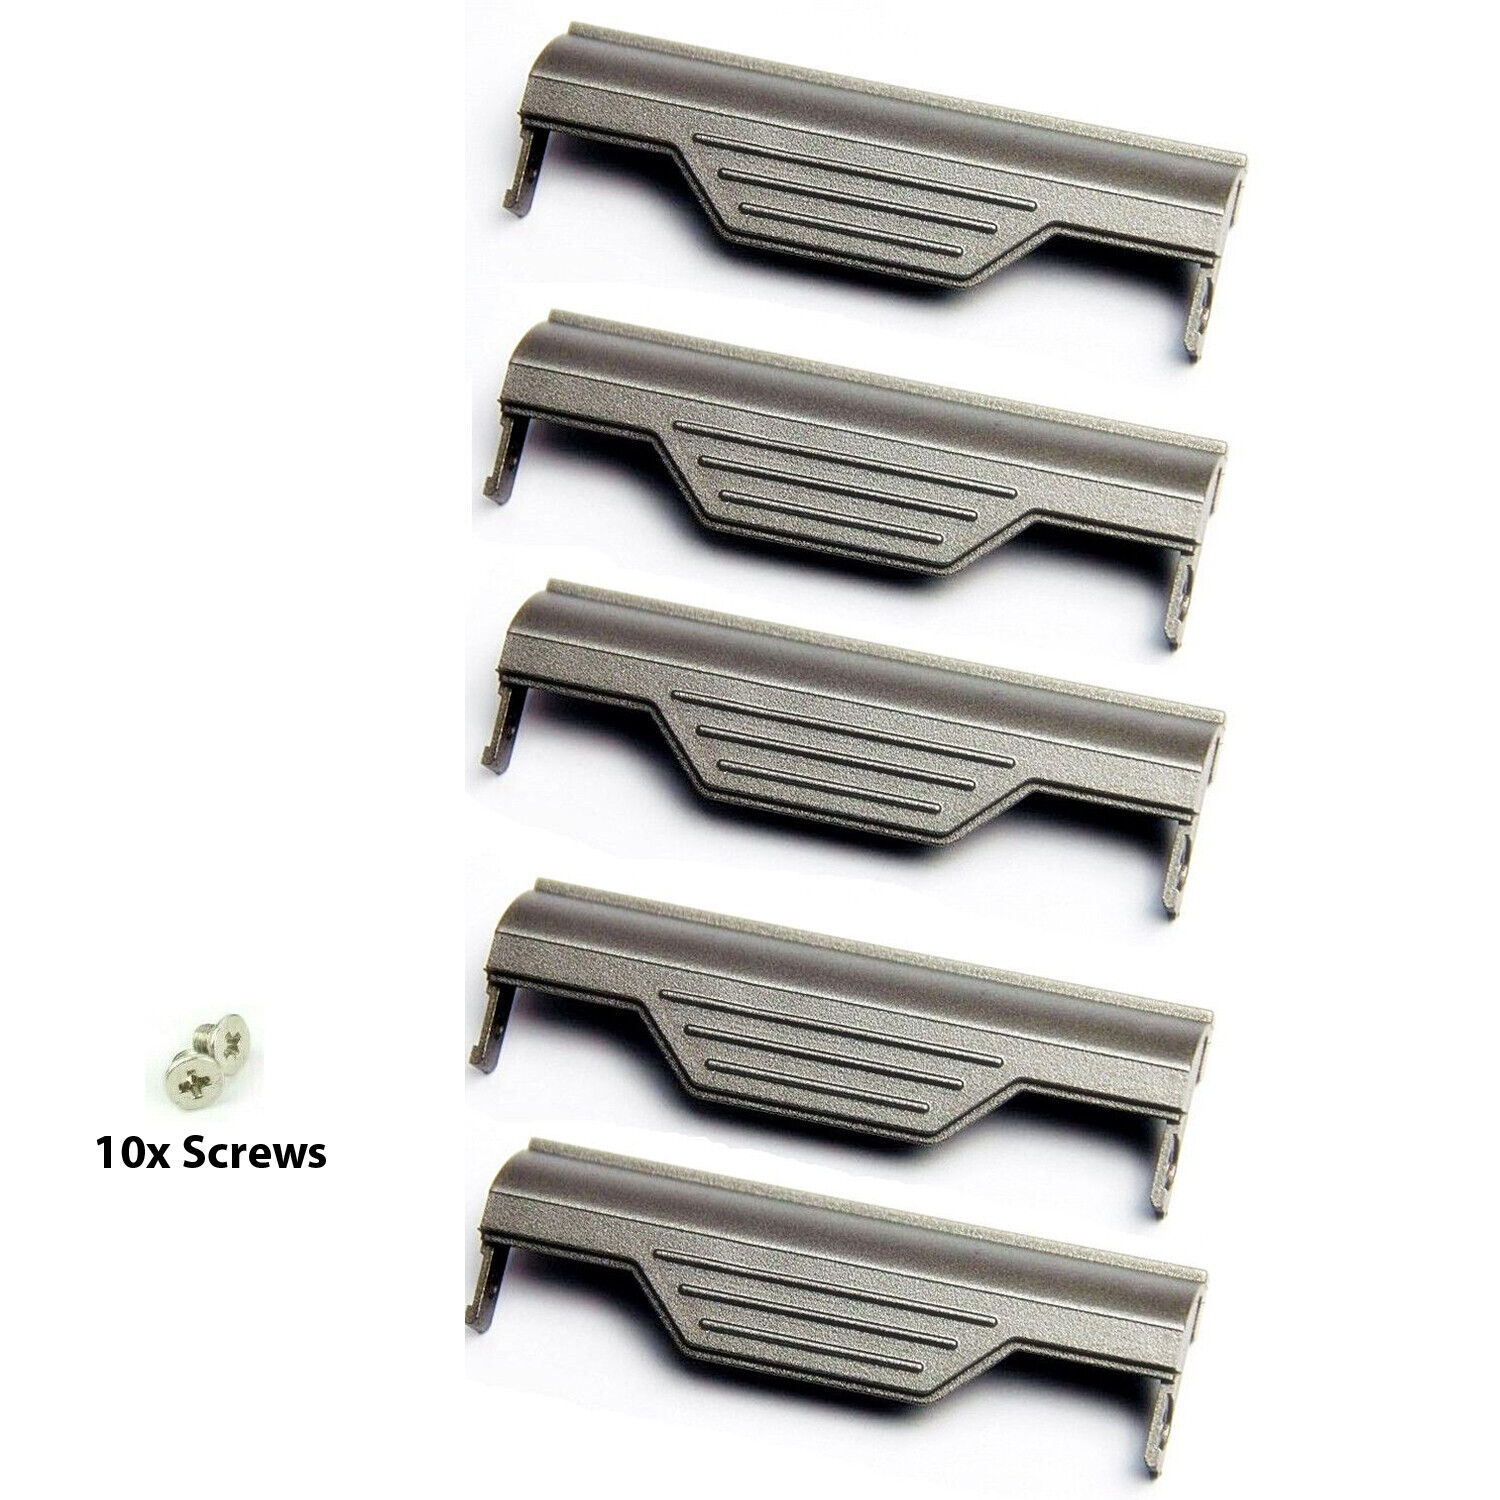 5 x HDD Hard Drive Caddy Cover For Dell Latitude D820 D830 M65 M72 FF389